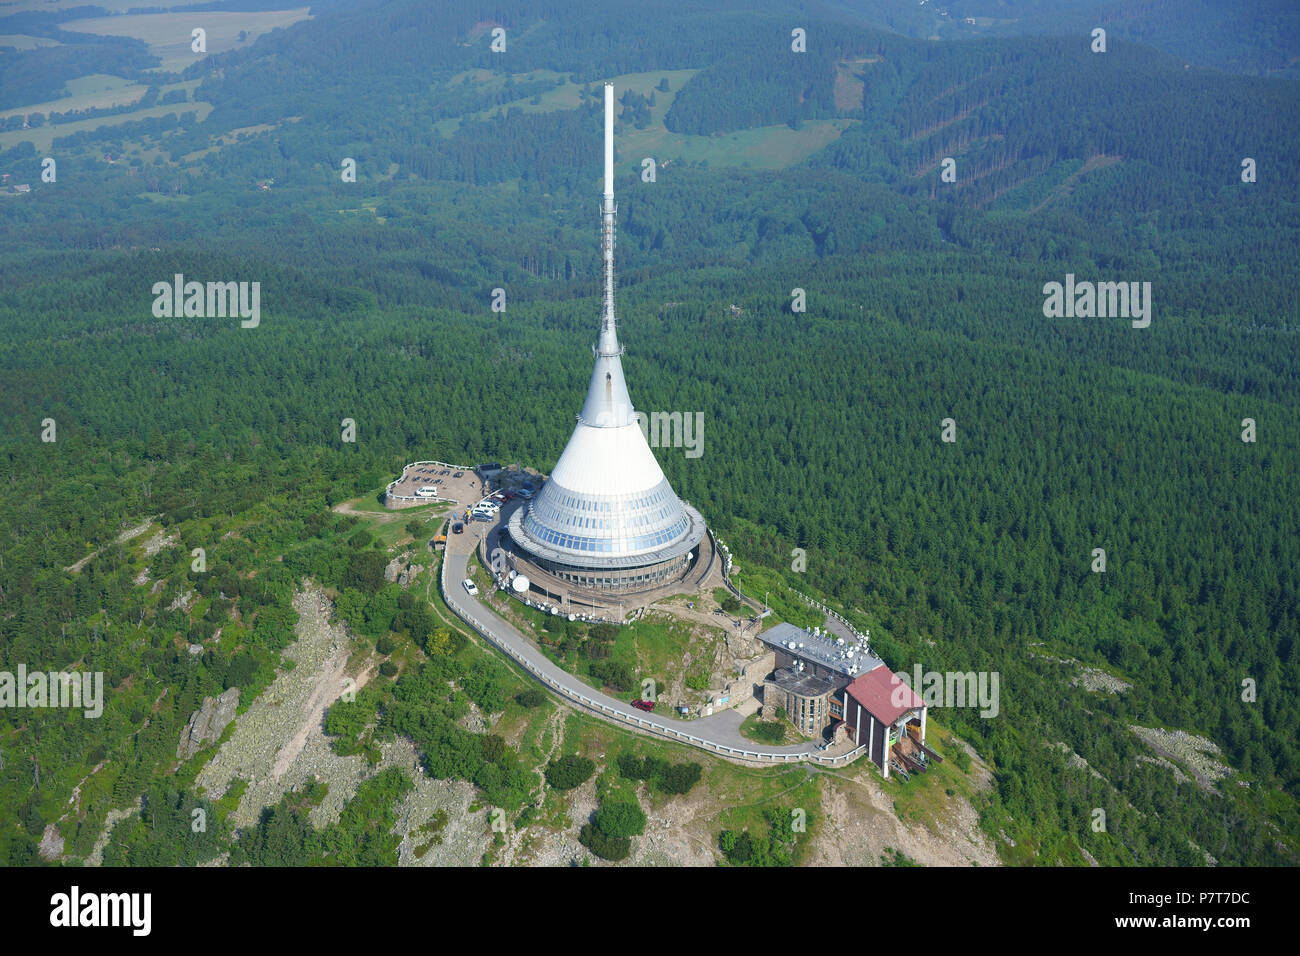 AERIAL VIEW. Hyperboloid structure (height: 94m) on Mount Ještěd (elevation: 1012m) used as a TV antenna and a hotel. Ještěd Tower, Liberec, Czechia. Stock Photo